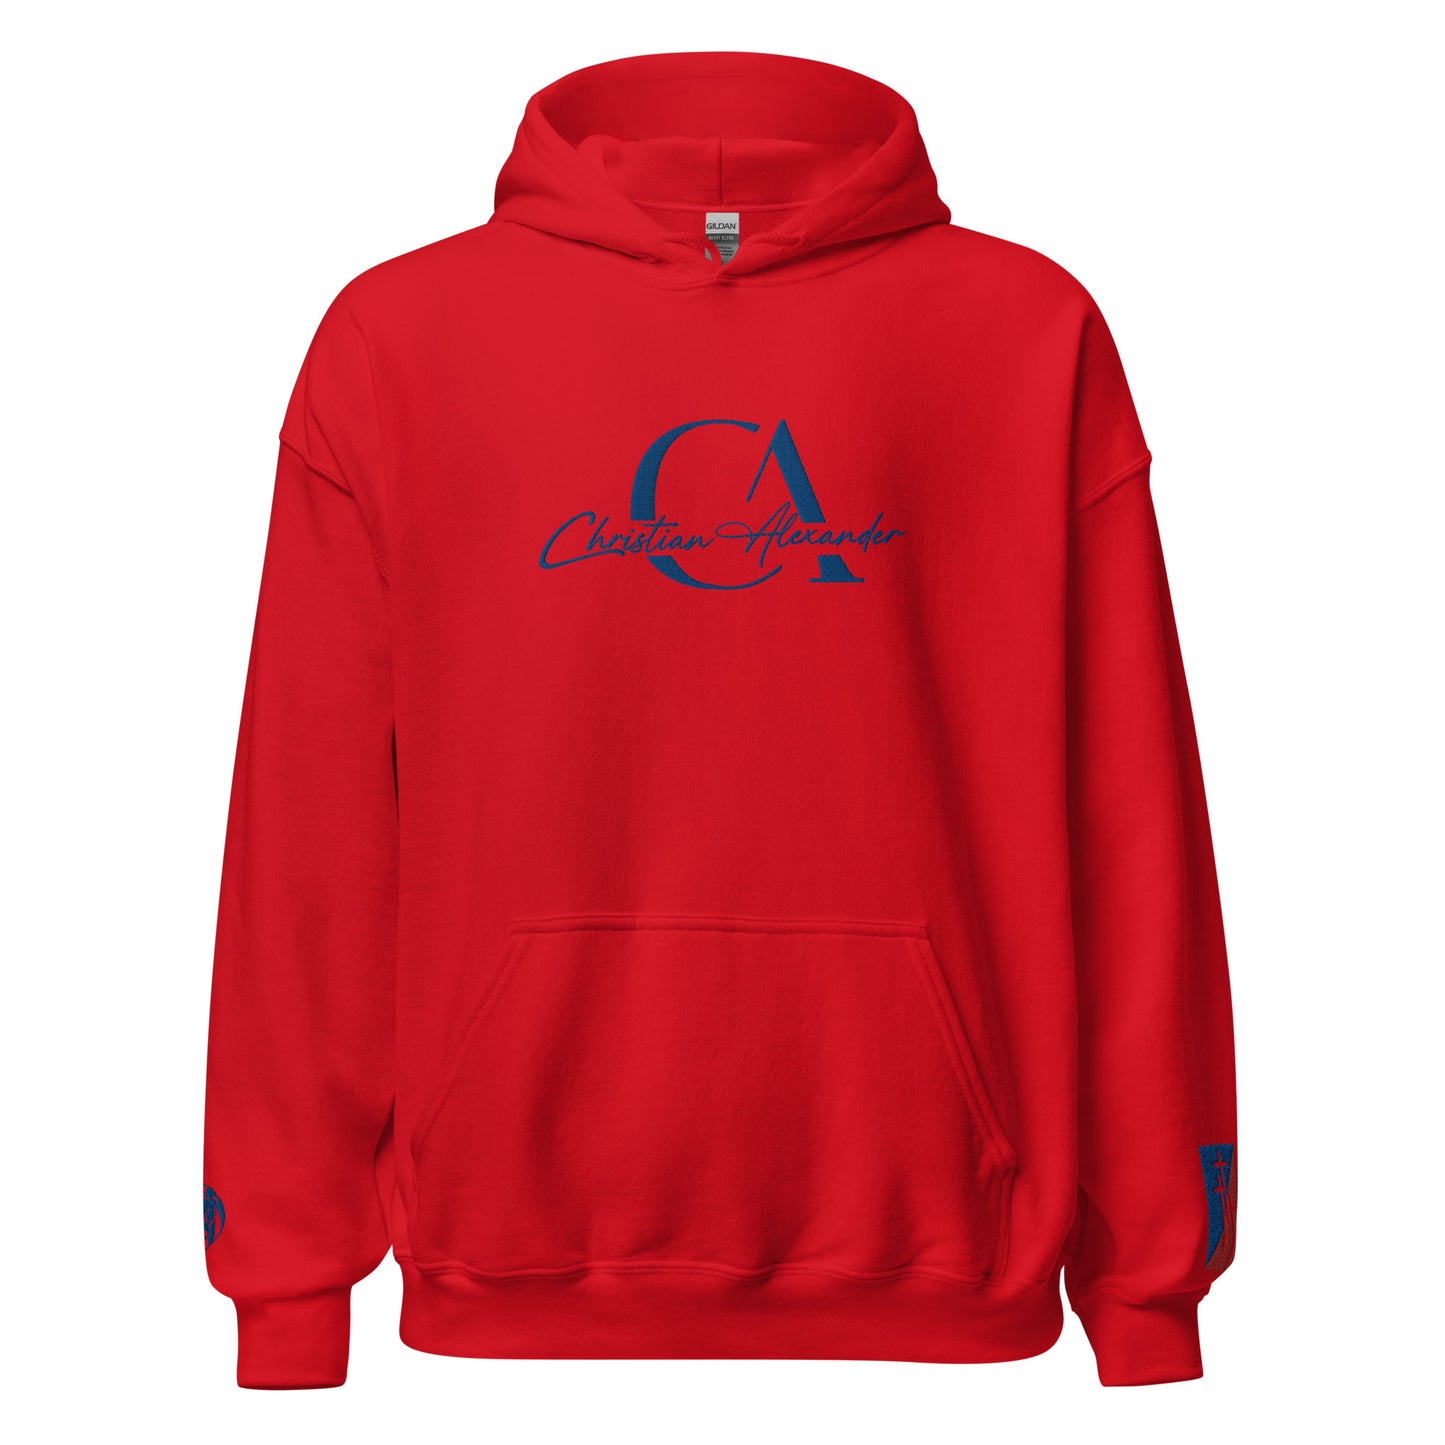 Christian Alexander Essential Cozy Hoodie: Your Perfect Evening Companion